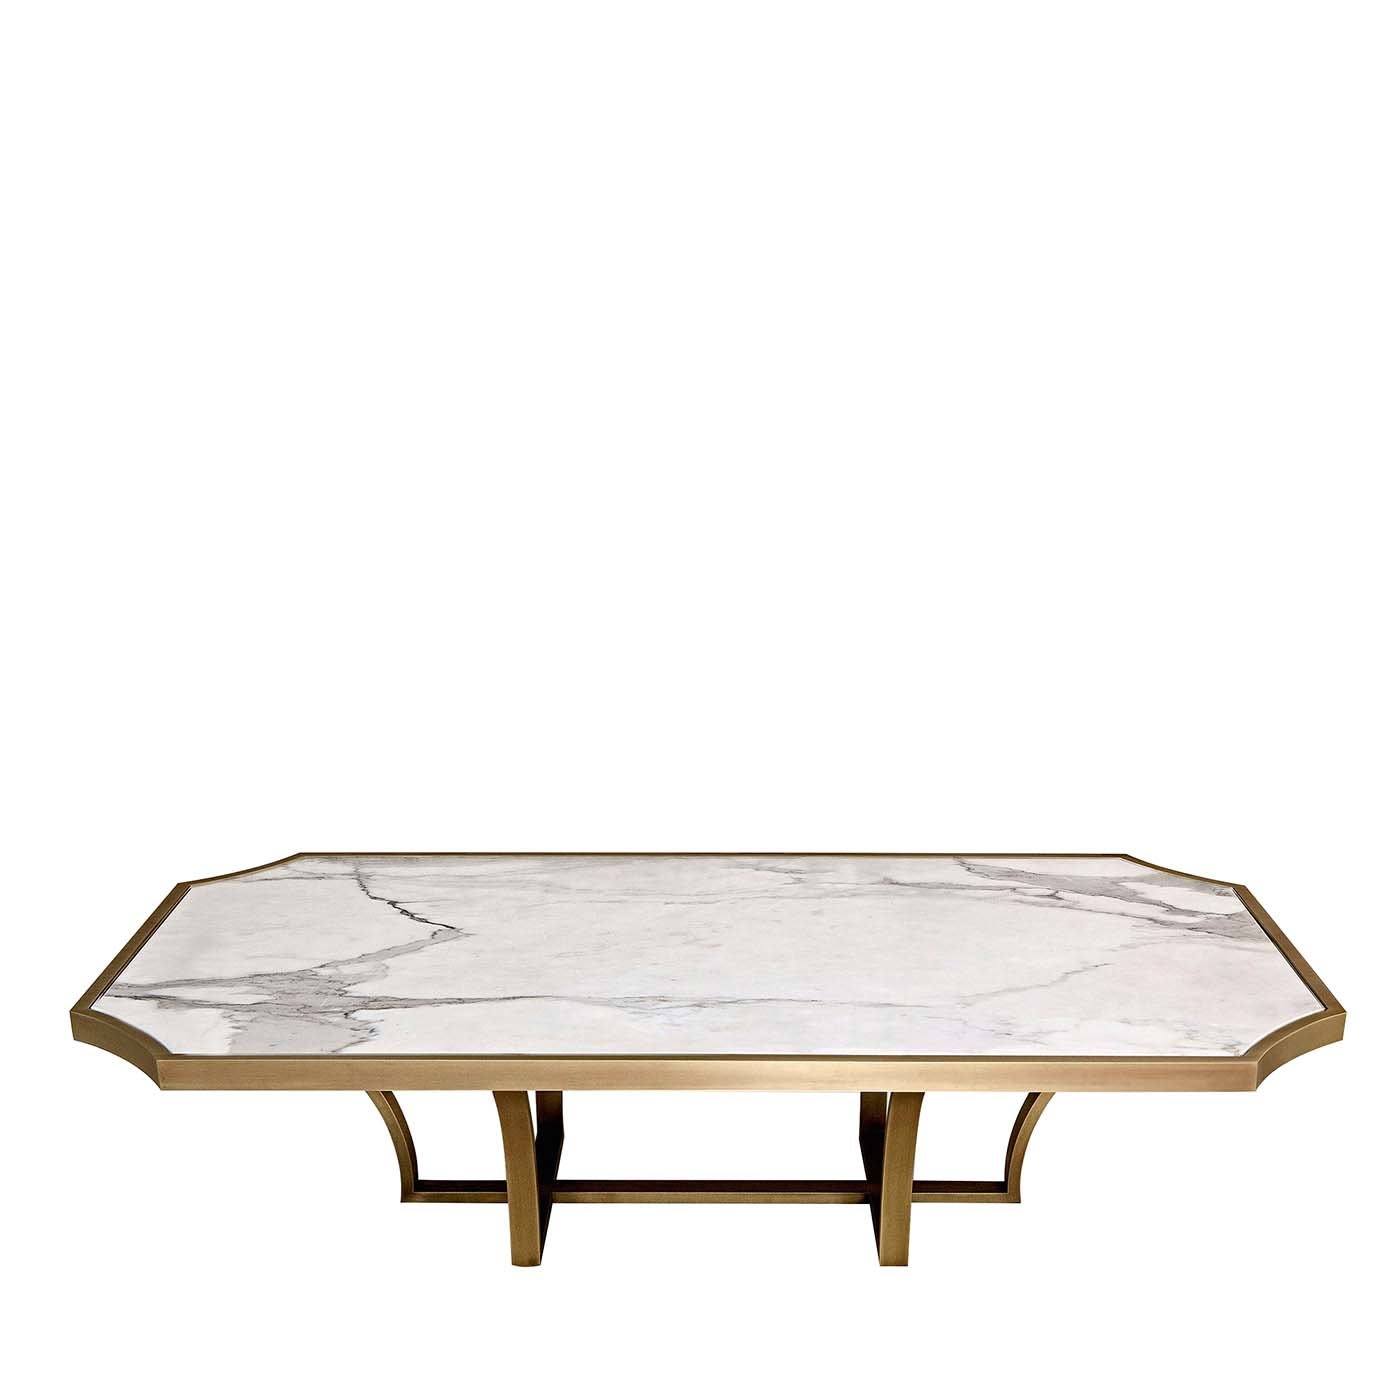 Savoy Coffee Low Table - Sicis